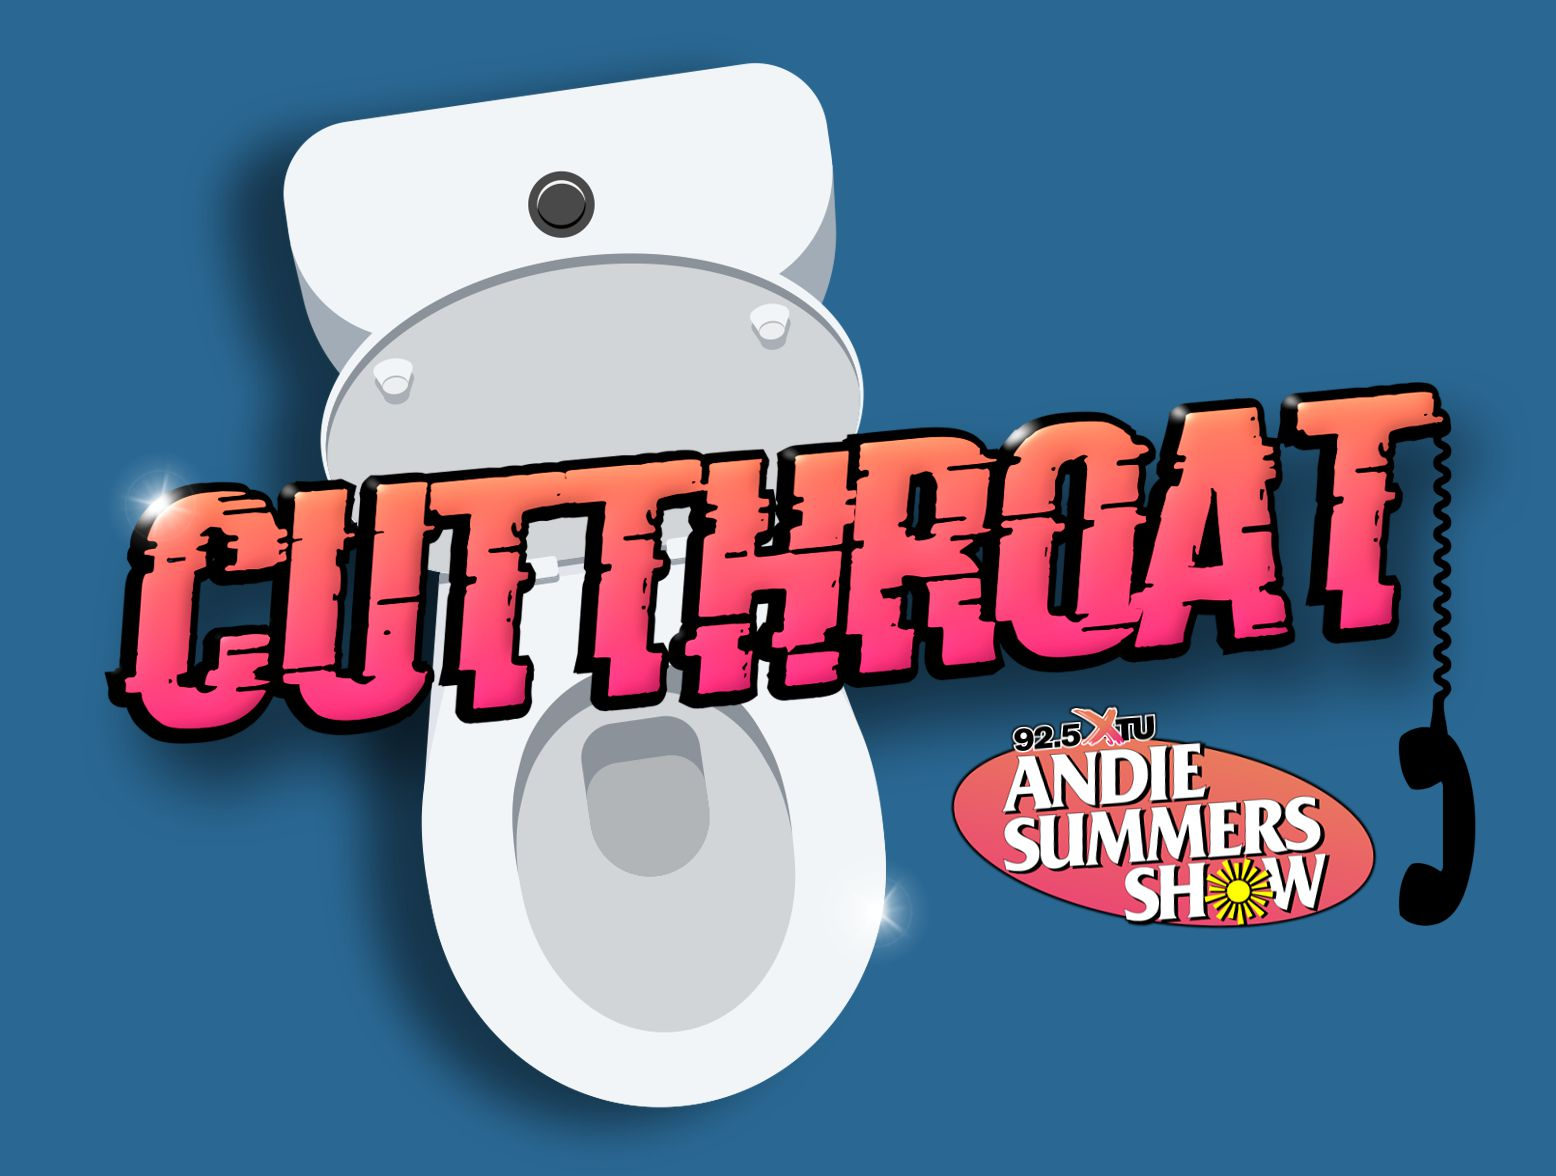 Cutthroat: Will Our Lovable Loser Win?